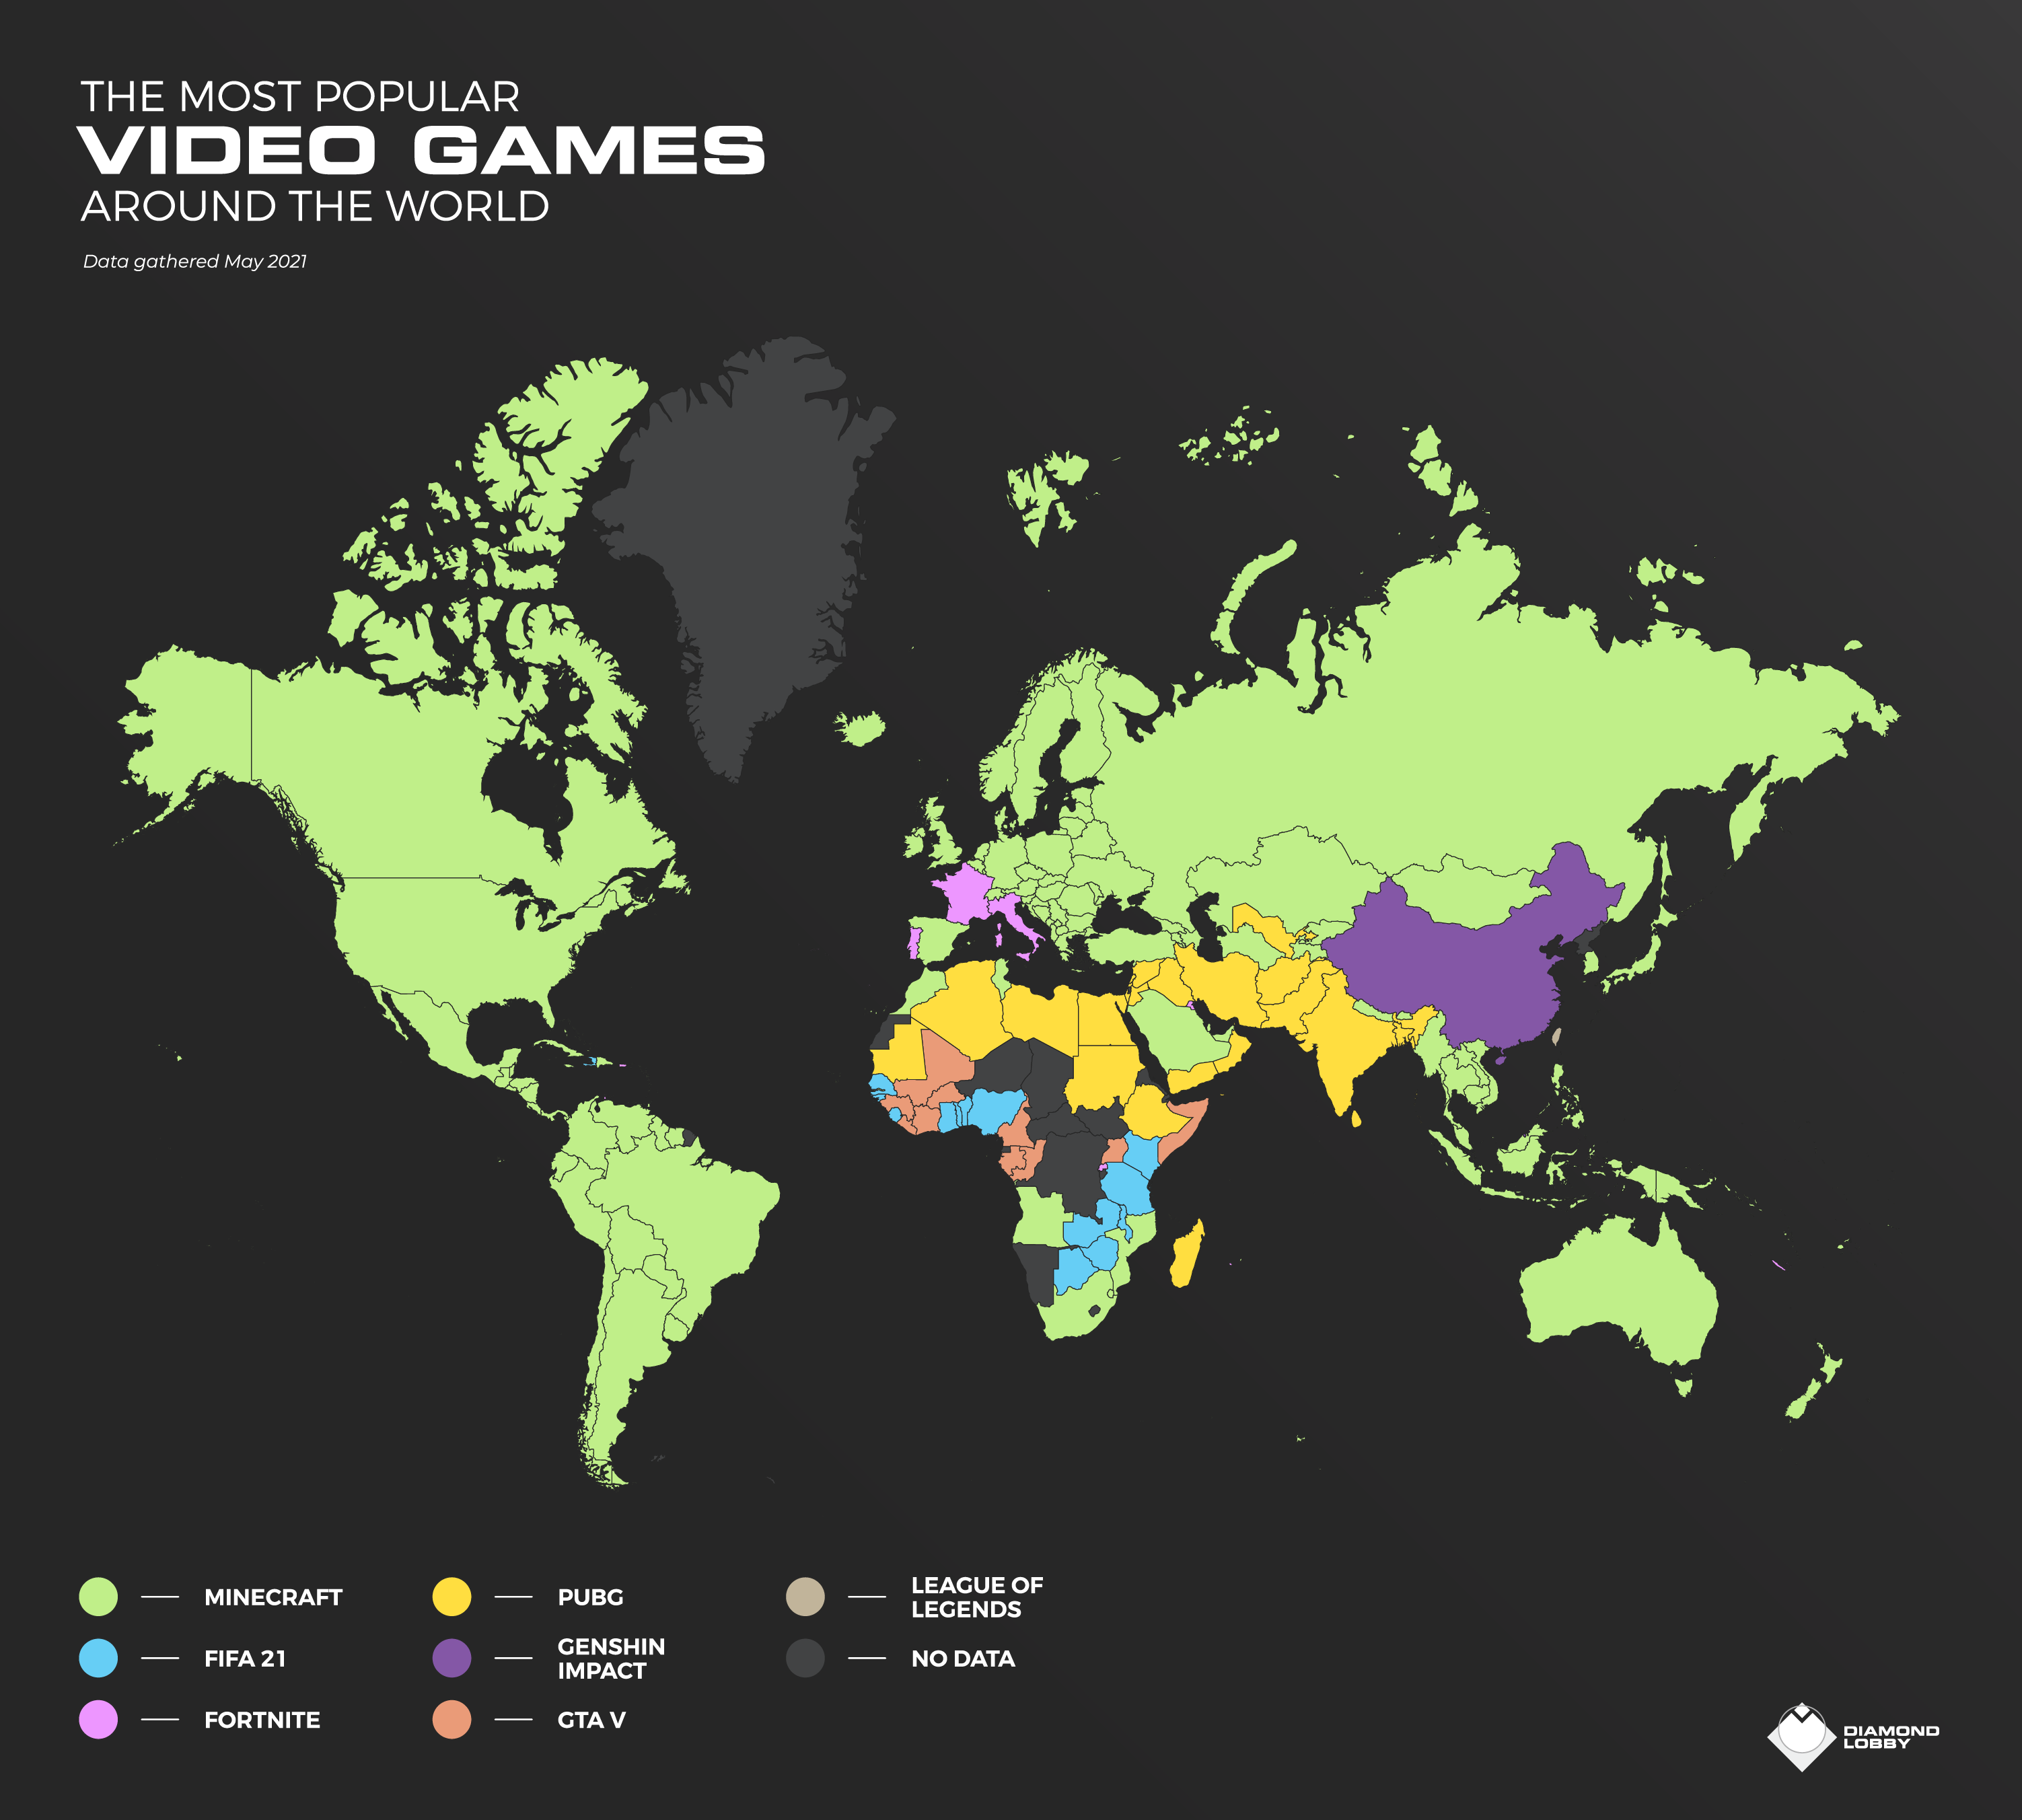 Most popular video game in the world